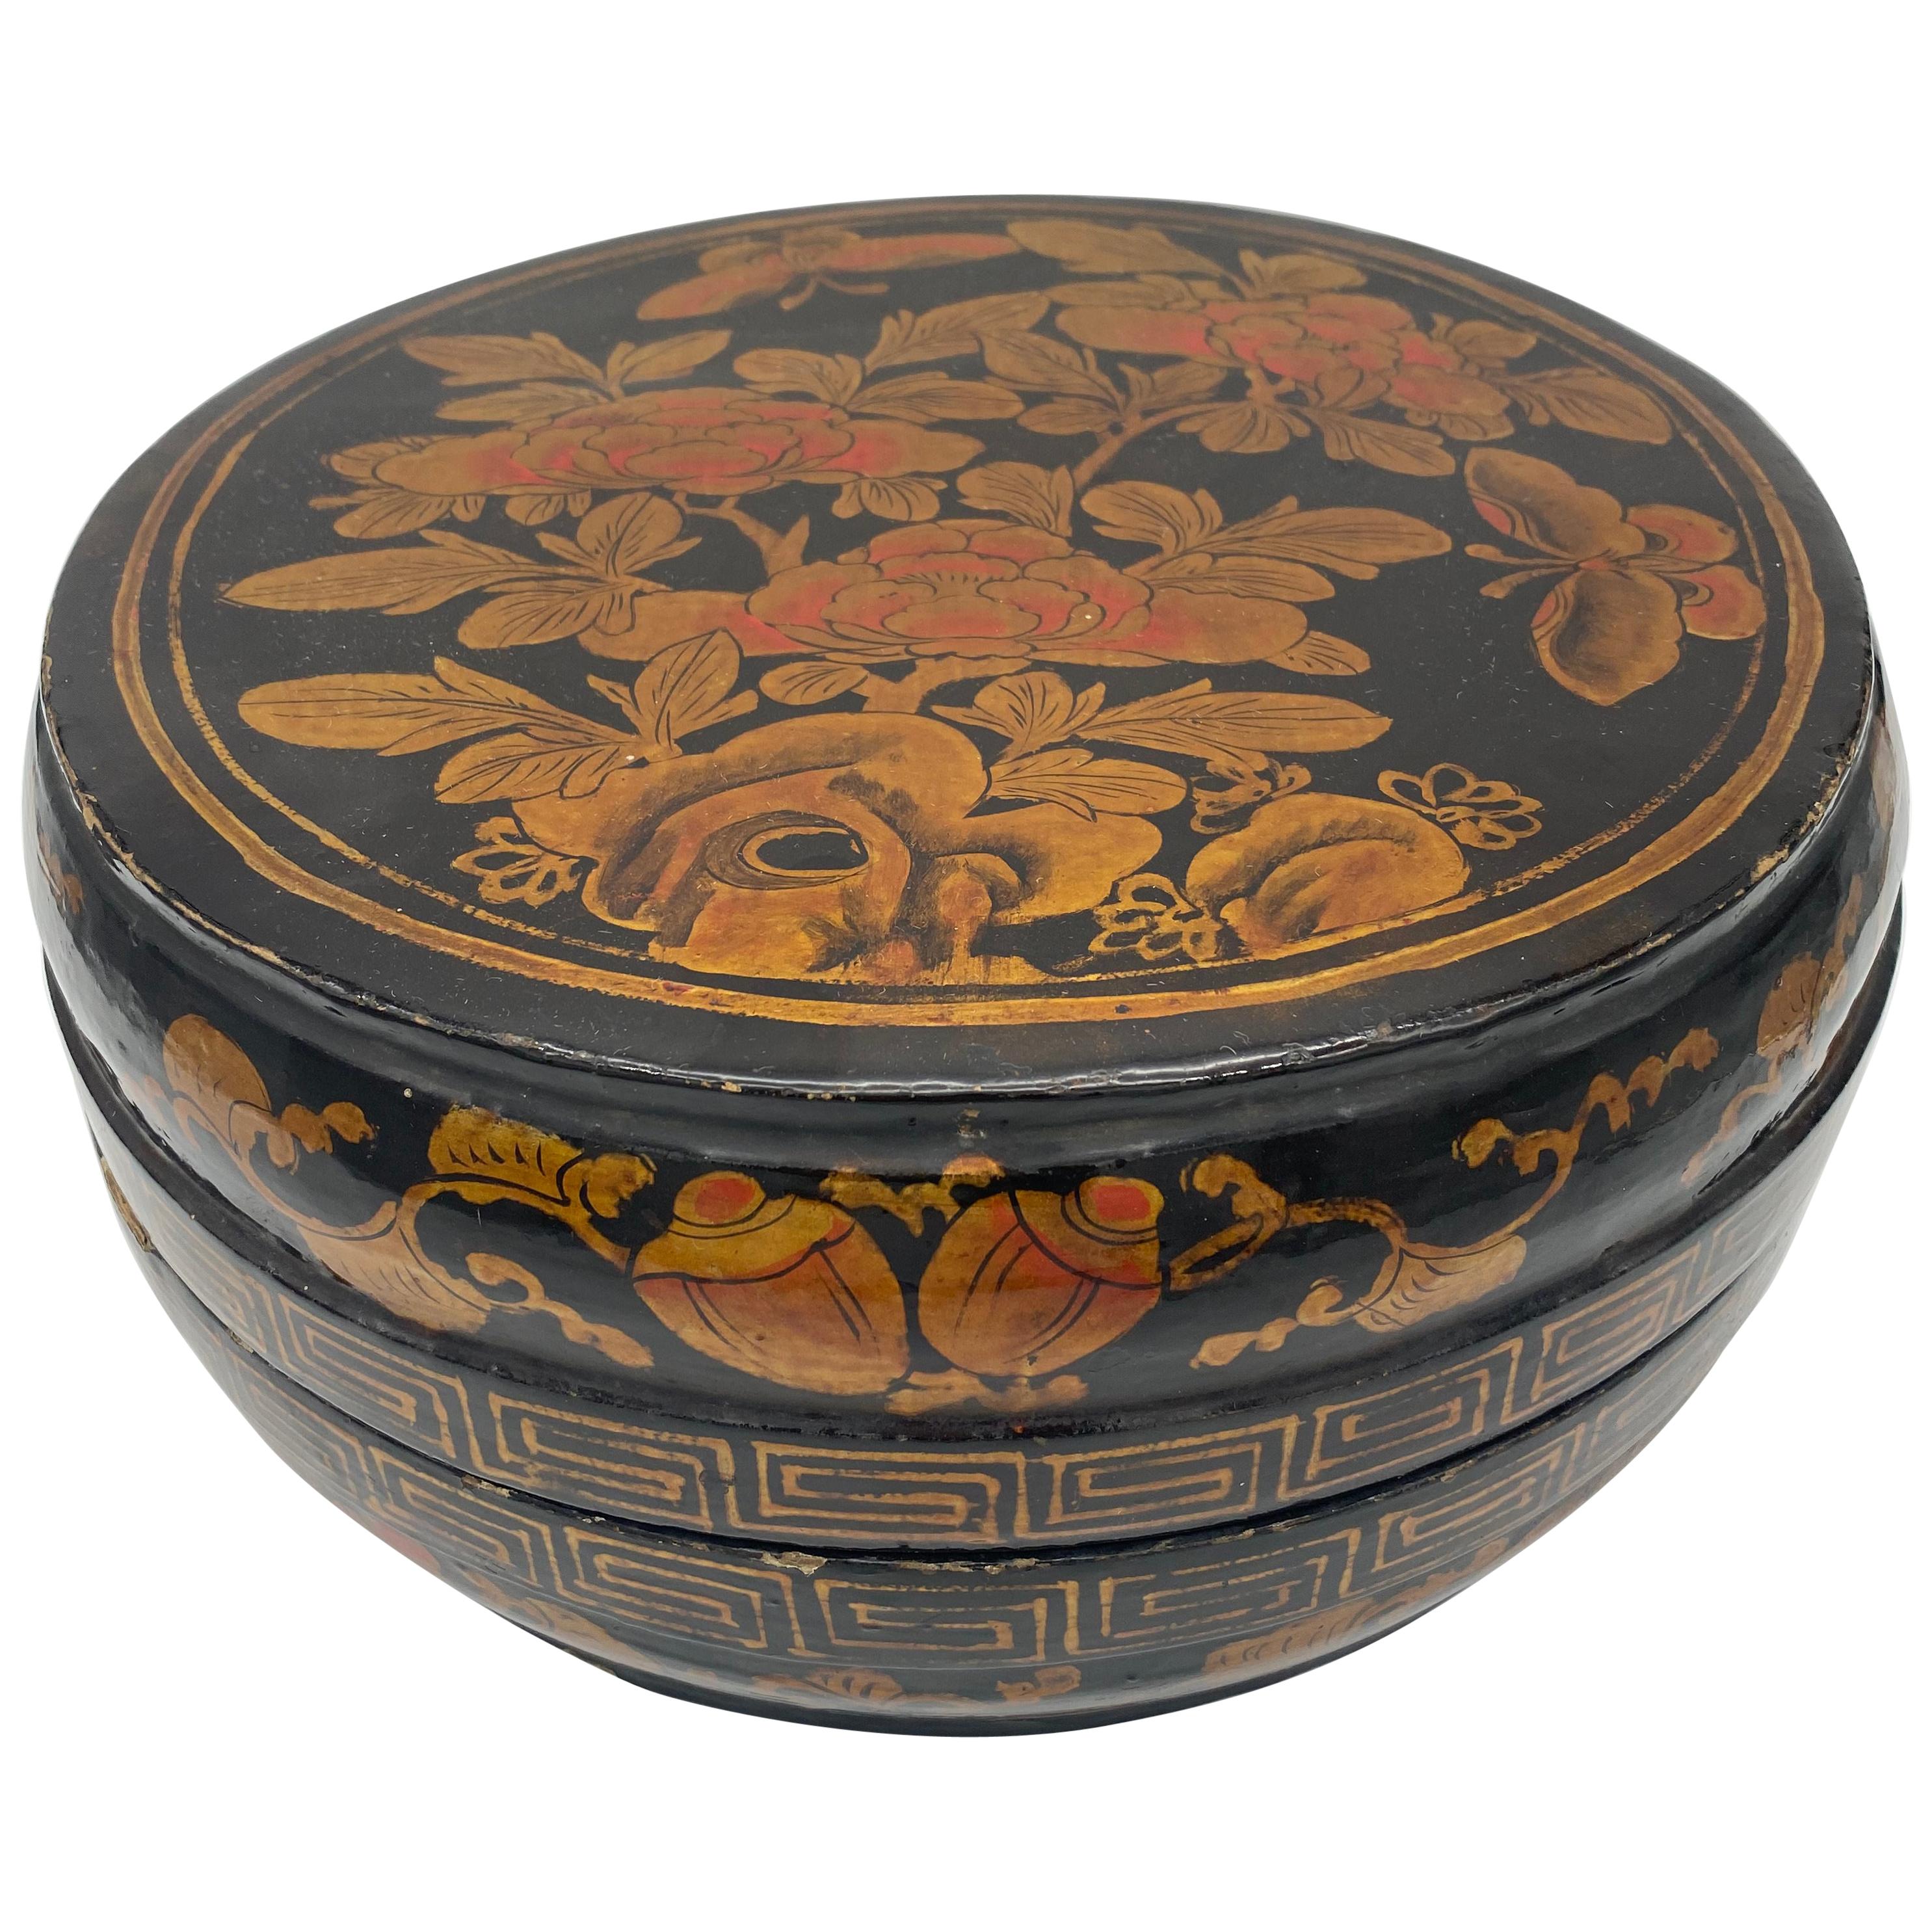 Big Golden Black Lacquer Chinese Box